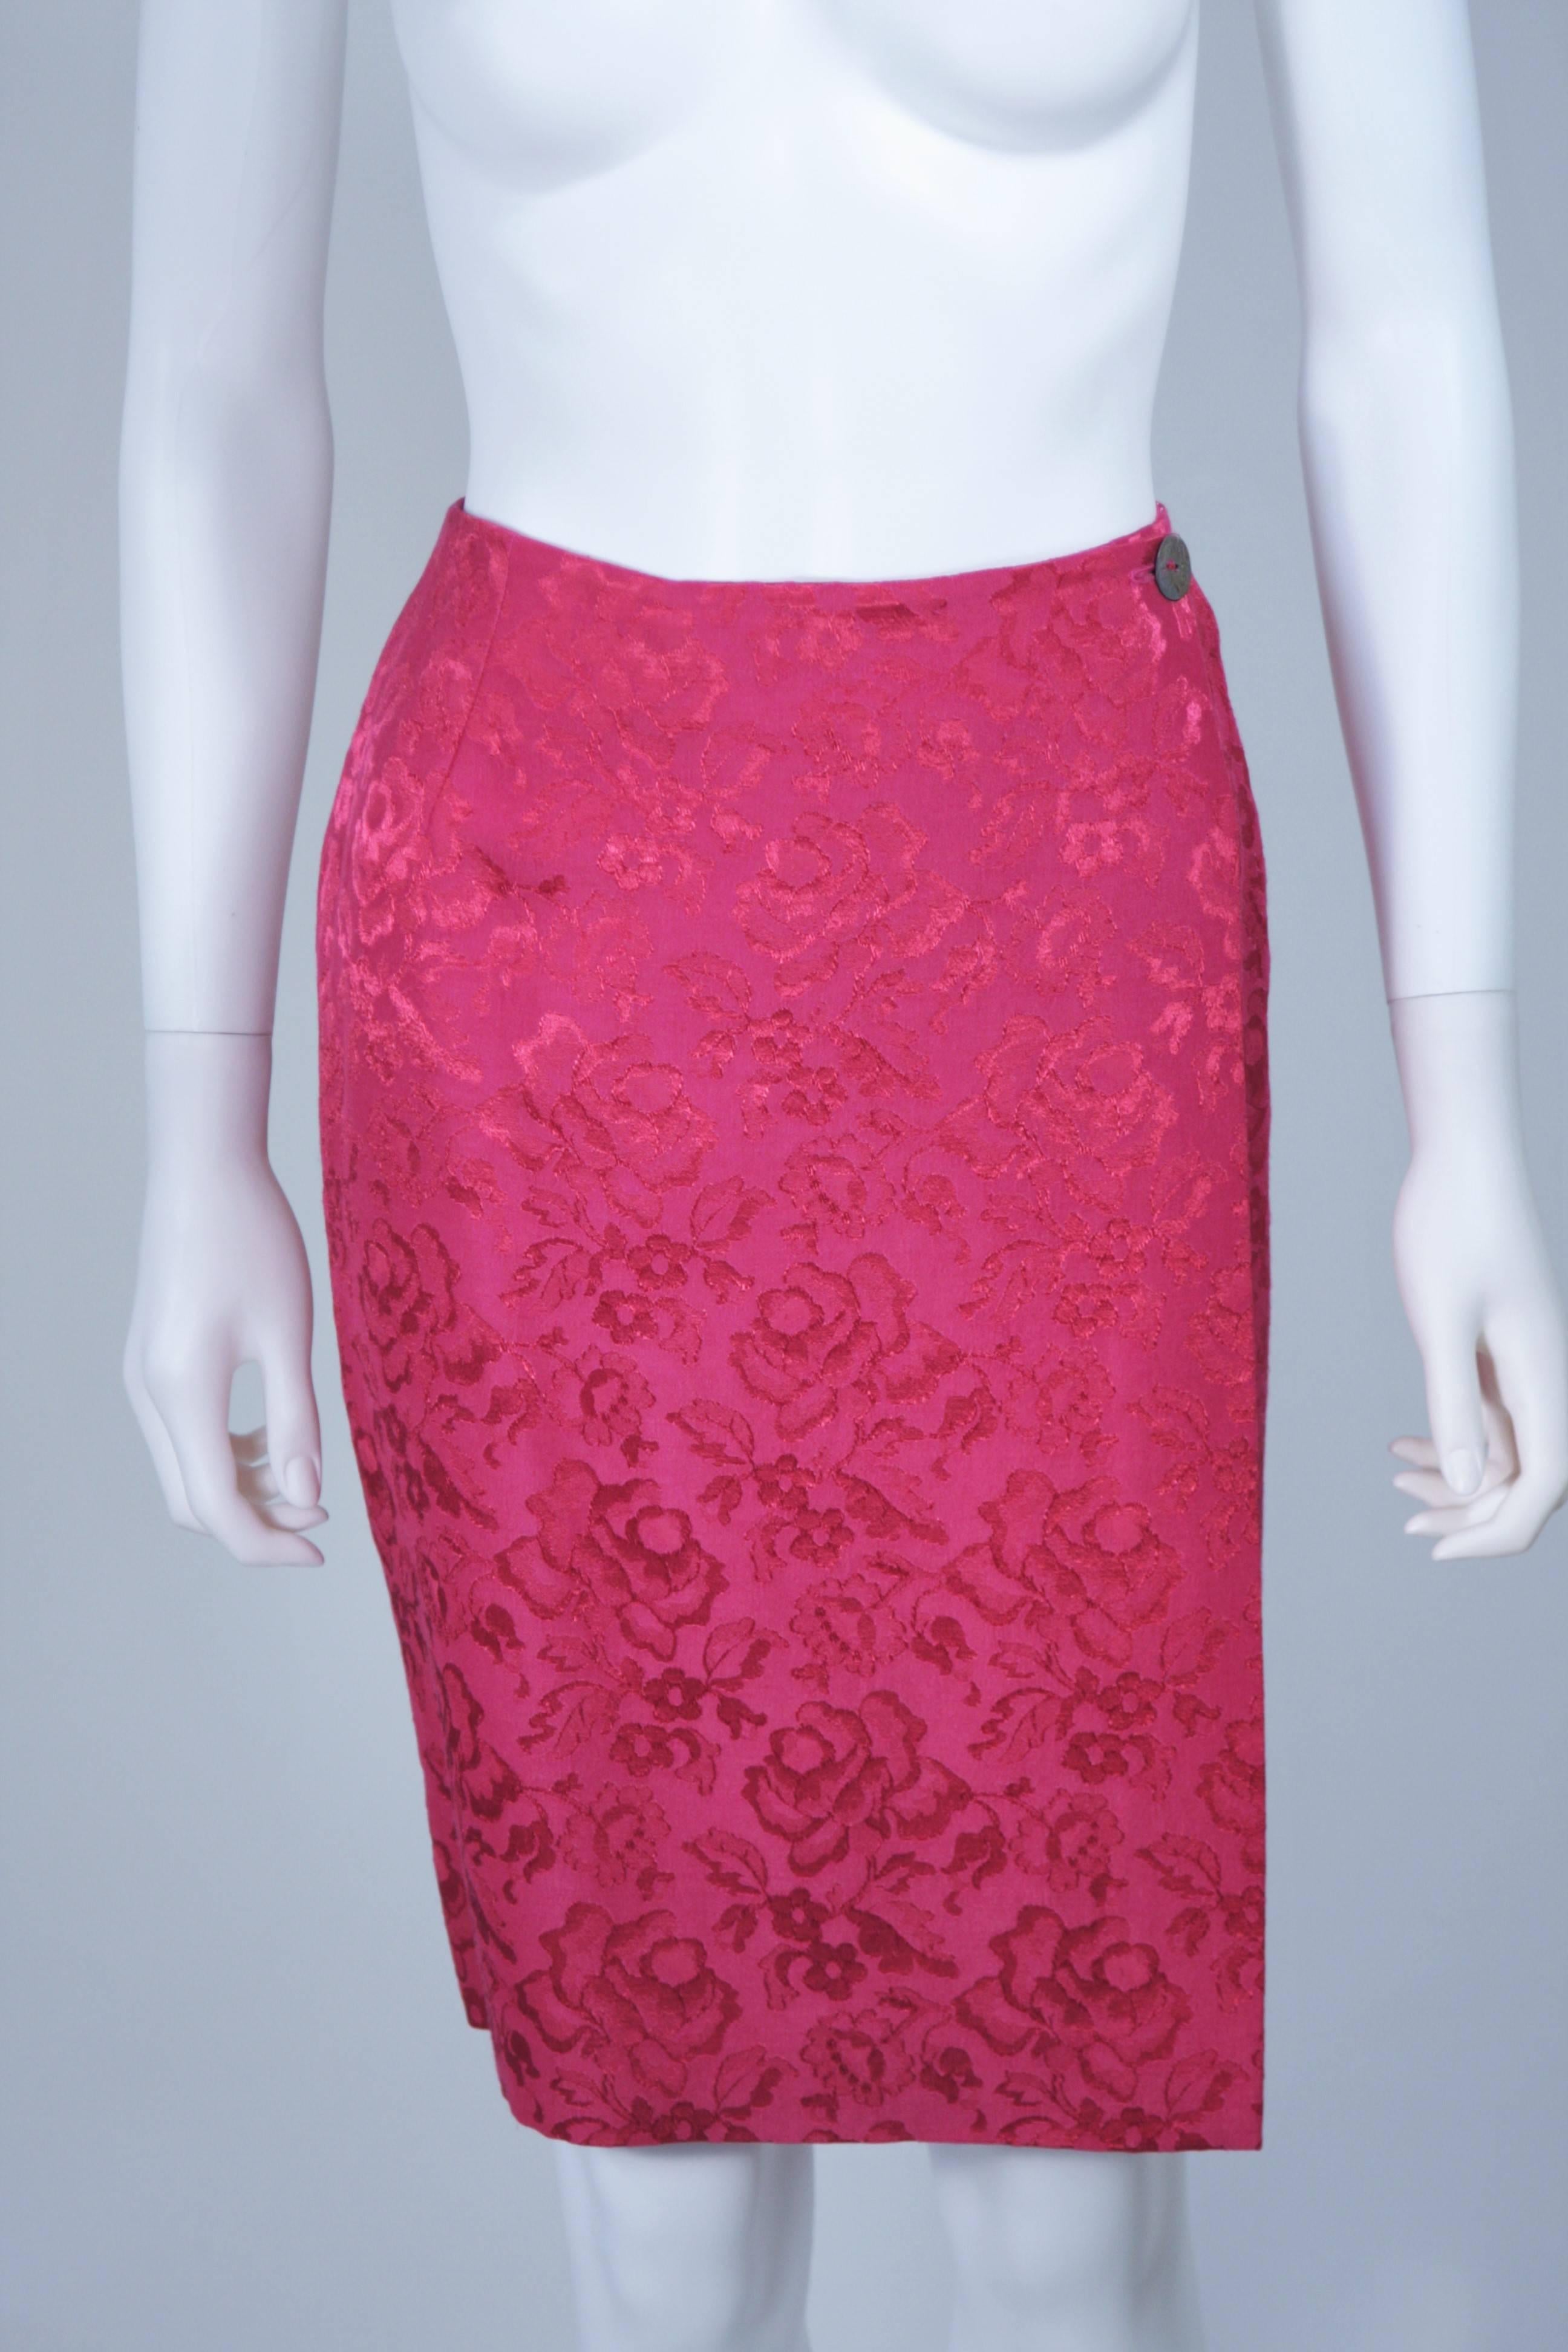 CHRISTIAN DIOR Pink Wool Lace Trim Ensemble with Pants and Skirt Size 10 42 4